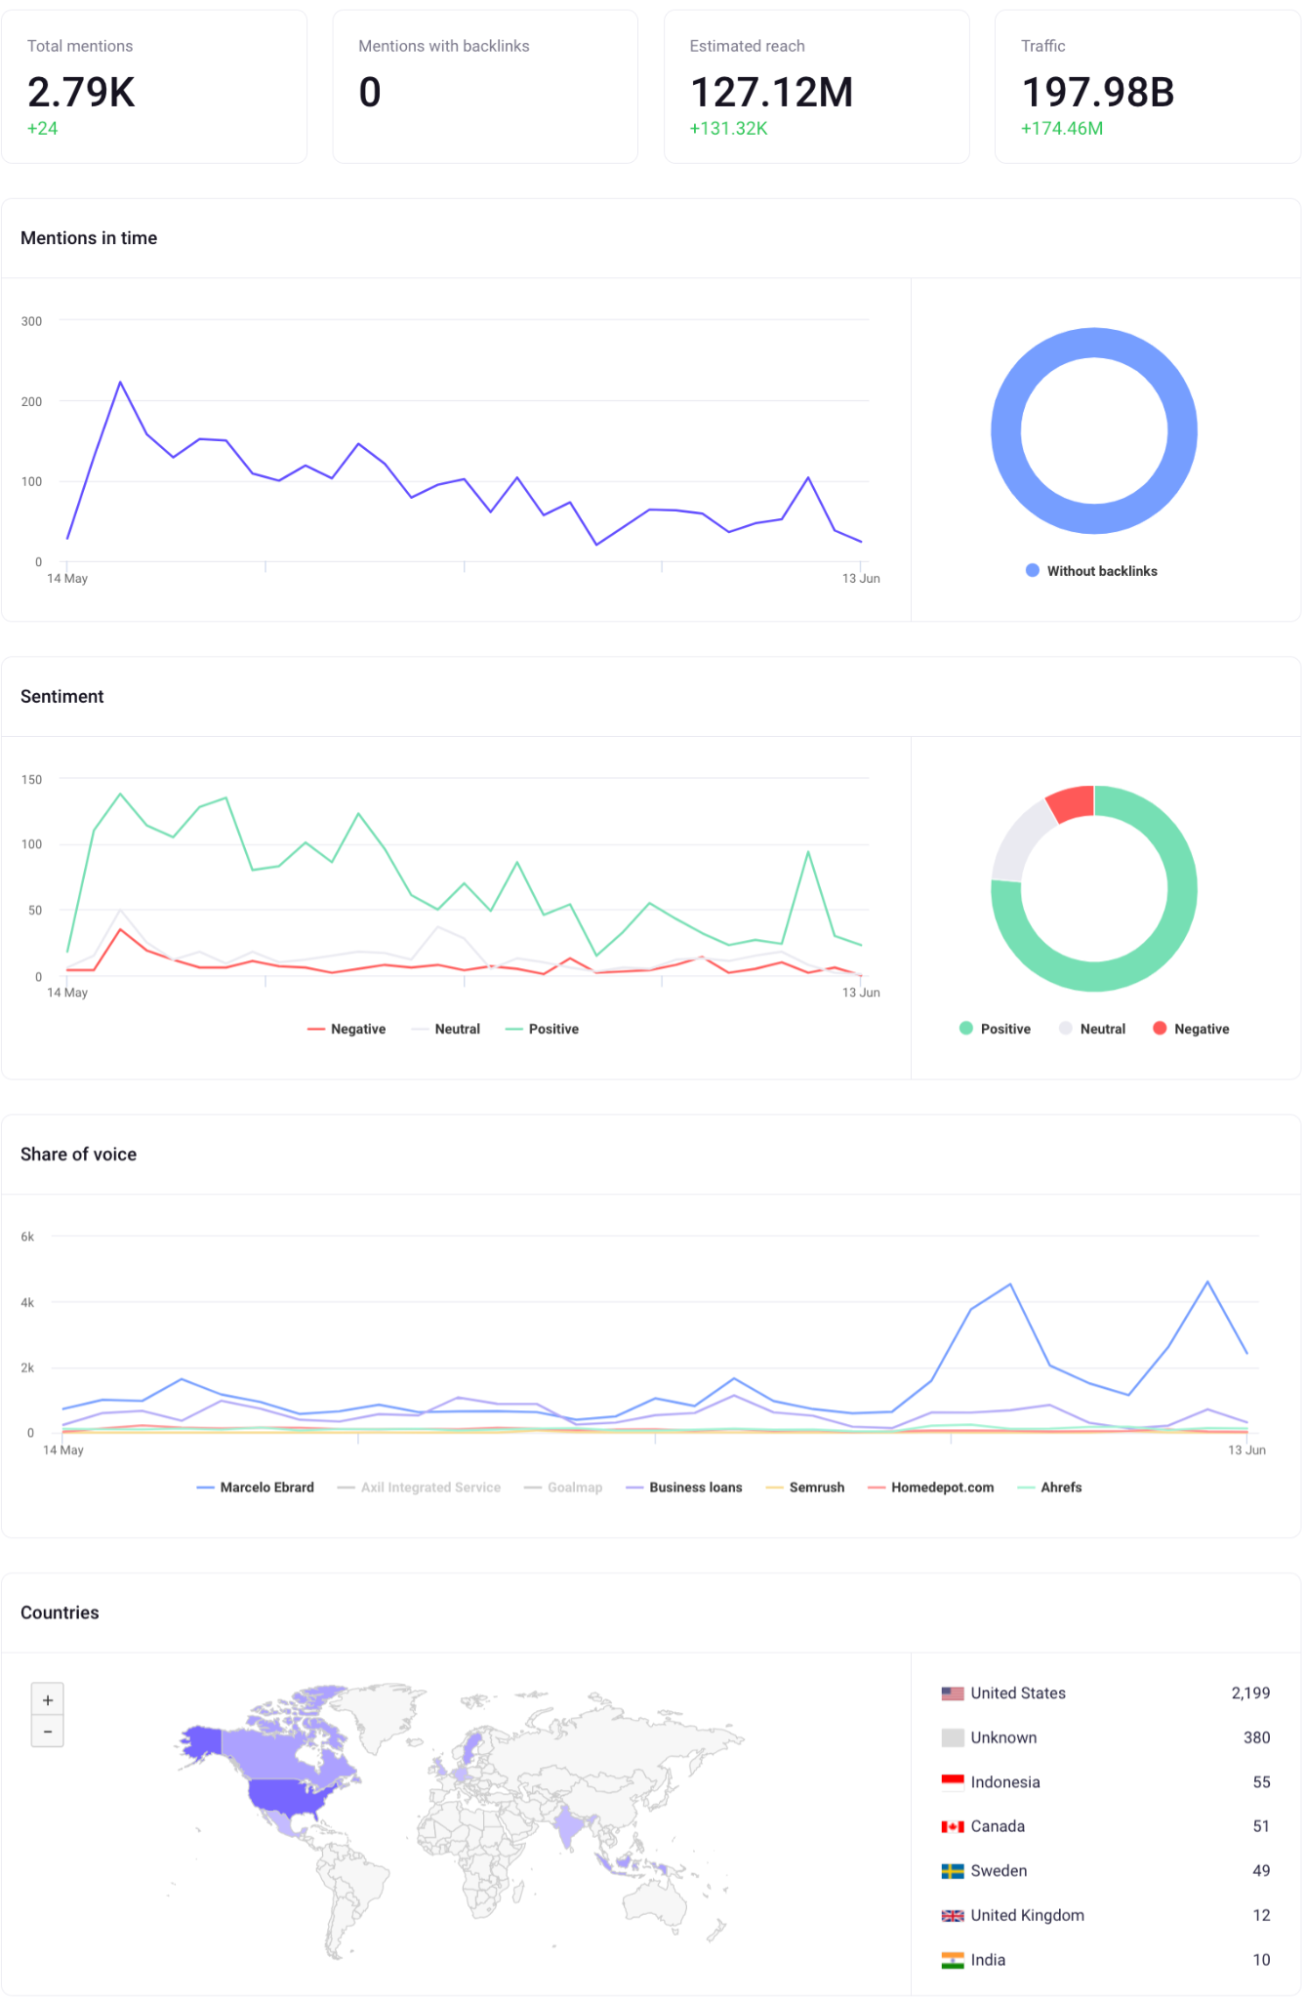 The Analytics tab of the Brand Monitoring app. The header shows total mentions, backlinks, estimated reach, and traffic. Then, graphs show trends for share of voice and sentiment for each analyzed keyword. The Countries chart shows the breakdown of mentions by country of origin.